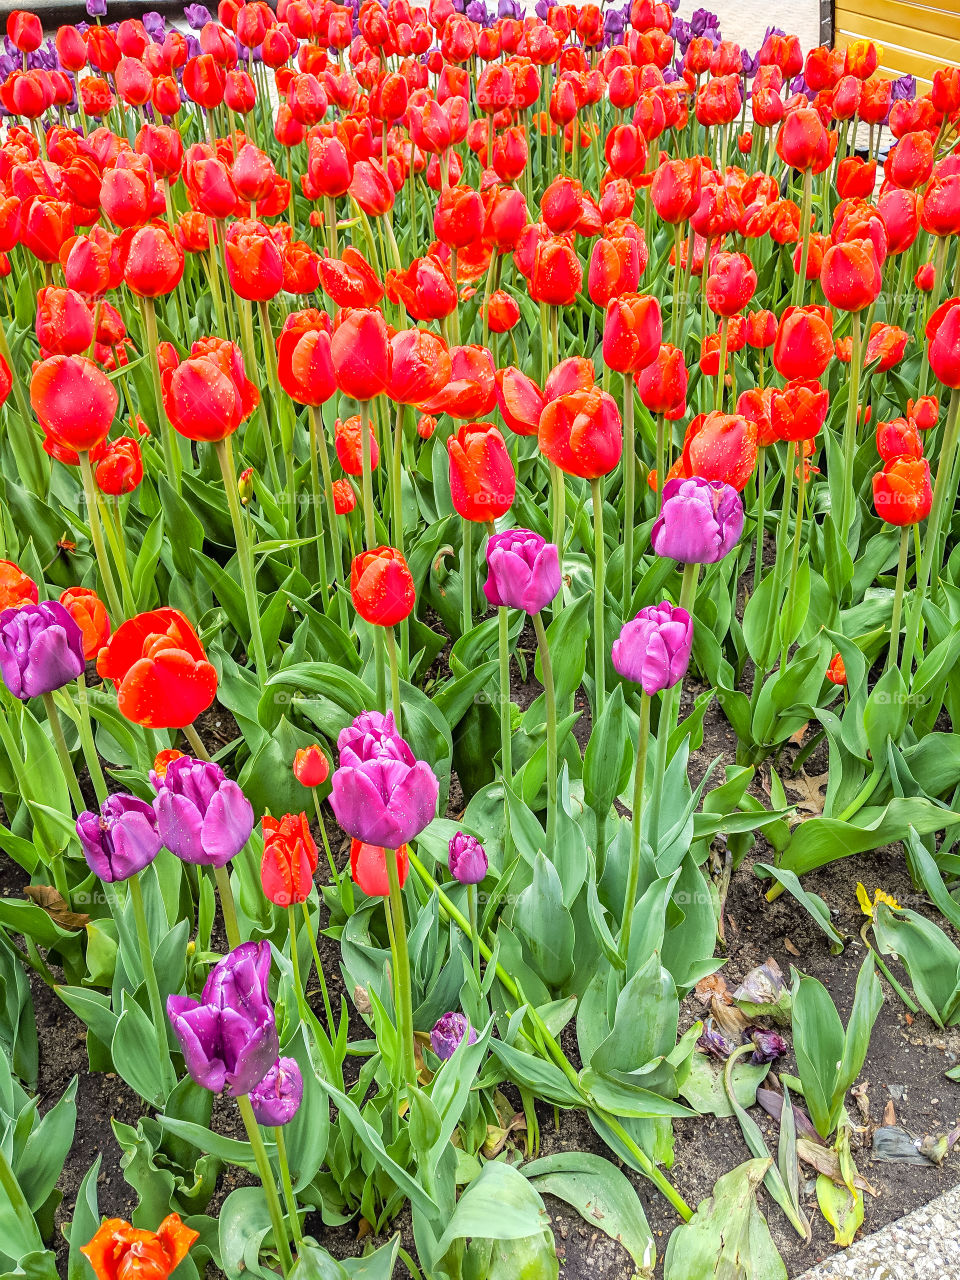 Vibrant, Bright, and Colorful Red and Purple Tulips